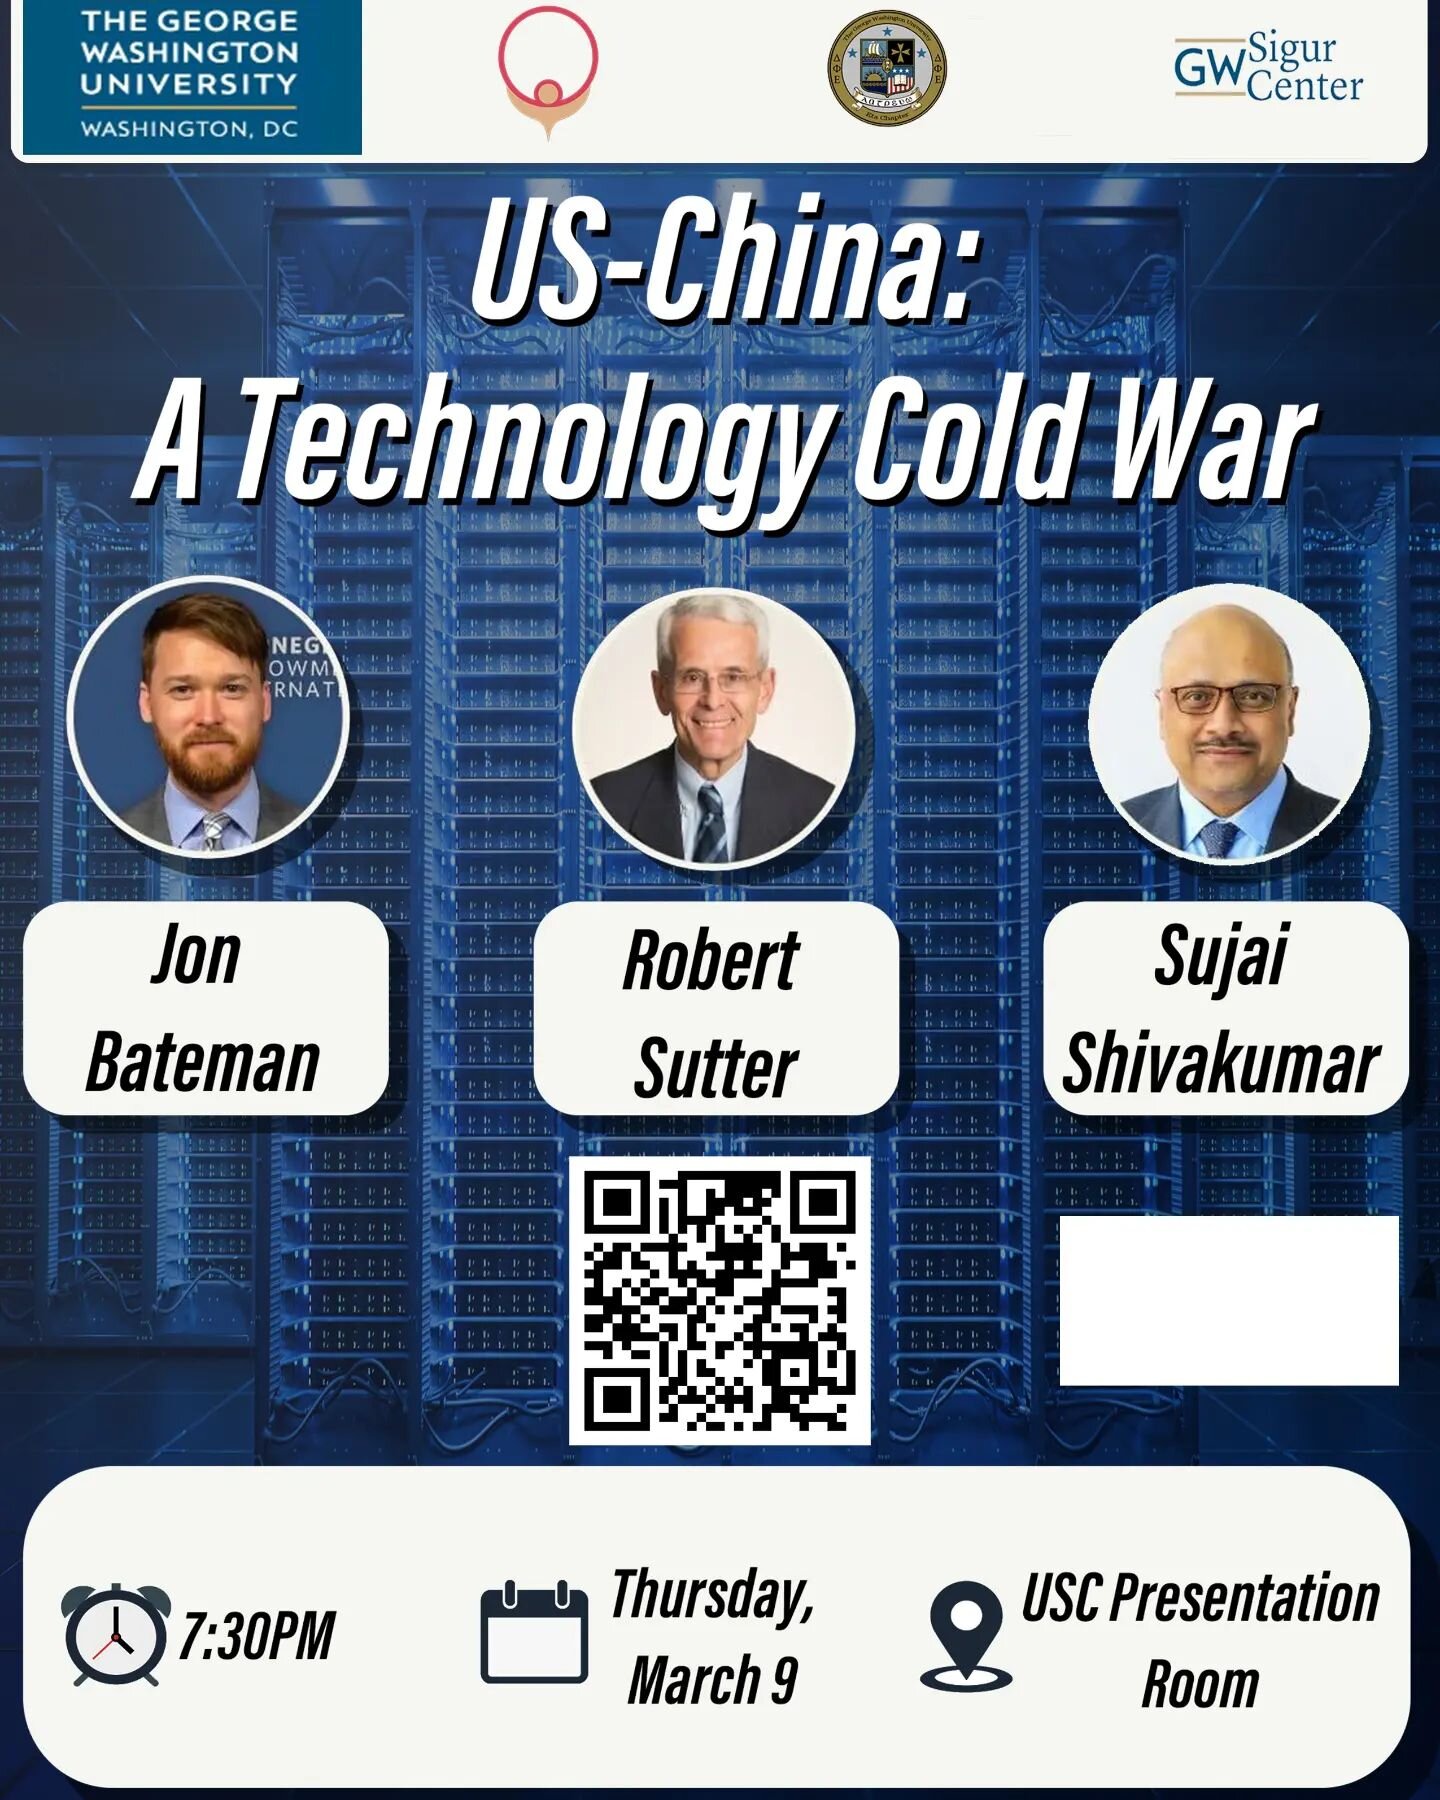 Onero is excited to bring you &quot;US-China: A Technology Cold War&quot; on Thursday, March 9th, alongside our co-sponsors @dpe.gwu and @gwusigurcenter.

Control over cutting-edge technology like AI, semiconductors and quantum computing will have si